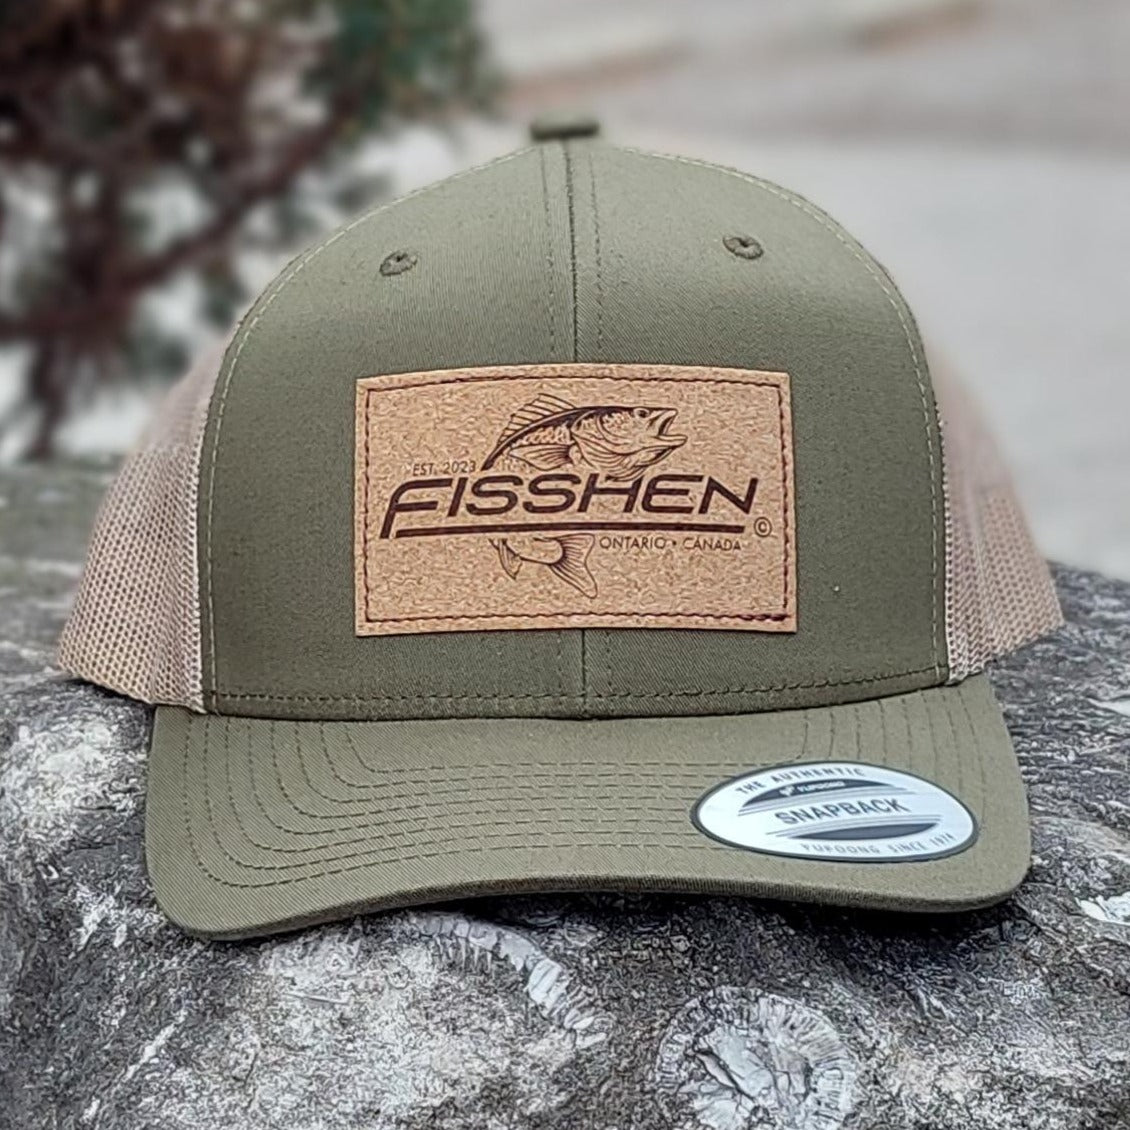 Fishing design with the word Fisshen. Trout image on a cork patch. Hat is Moss green with taupe back